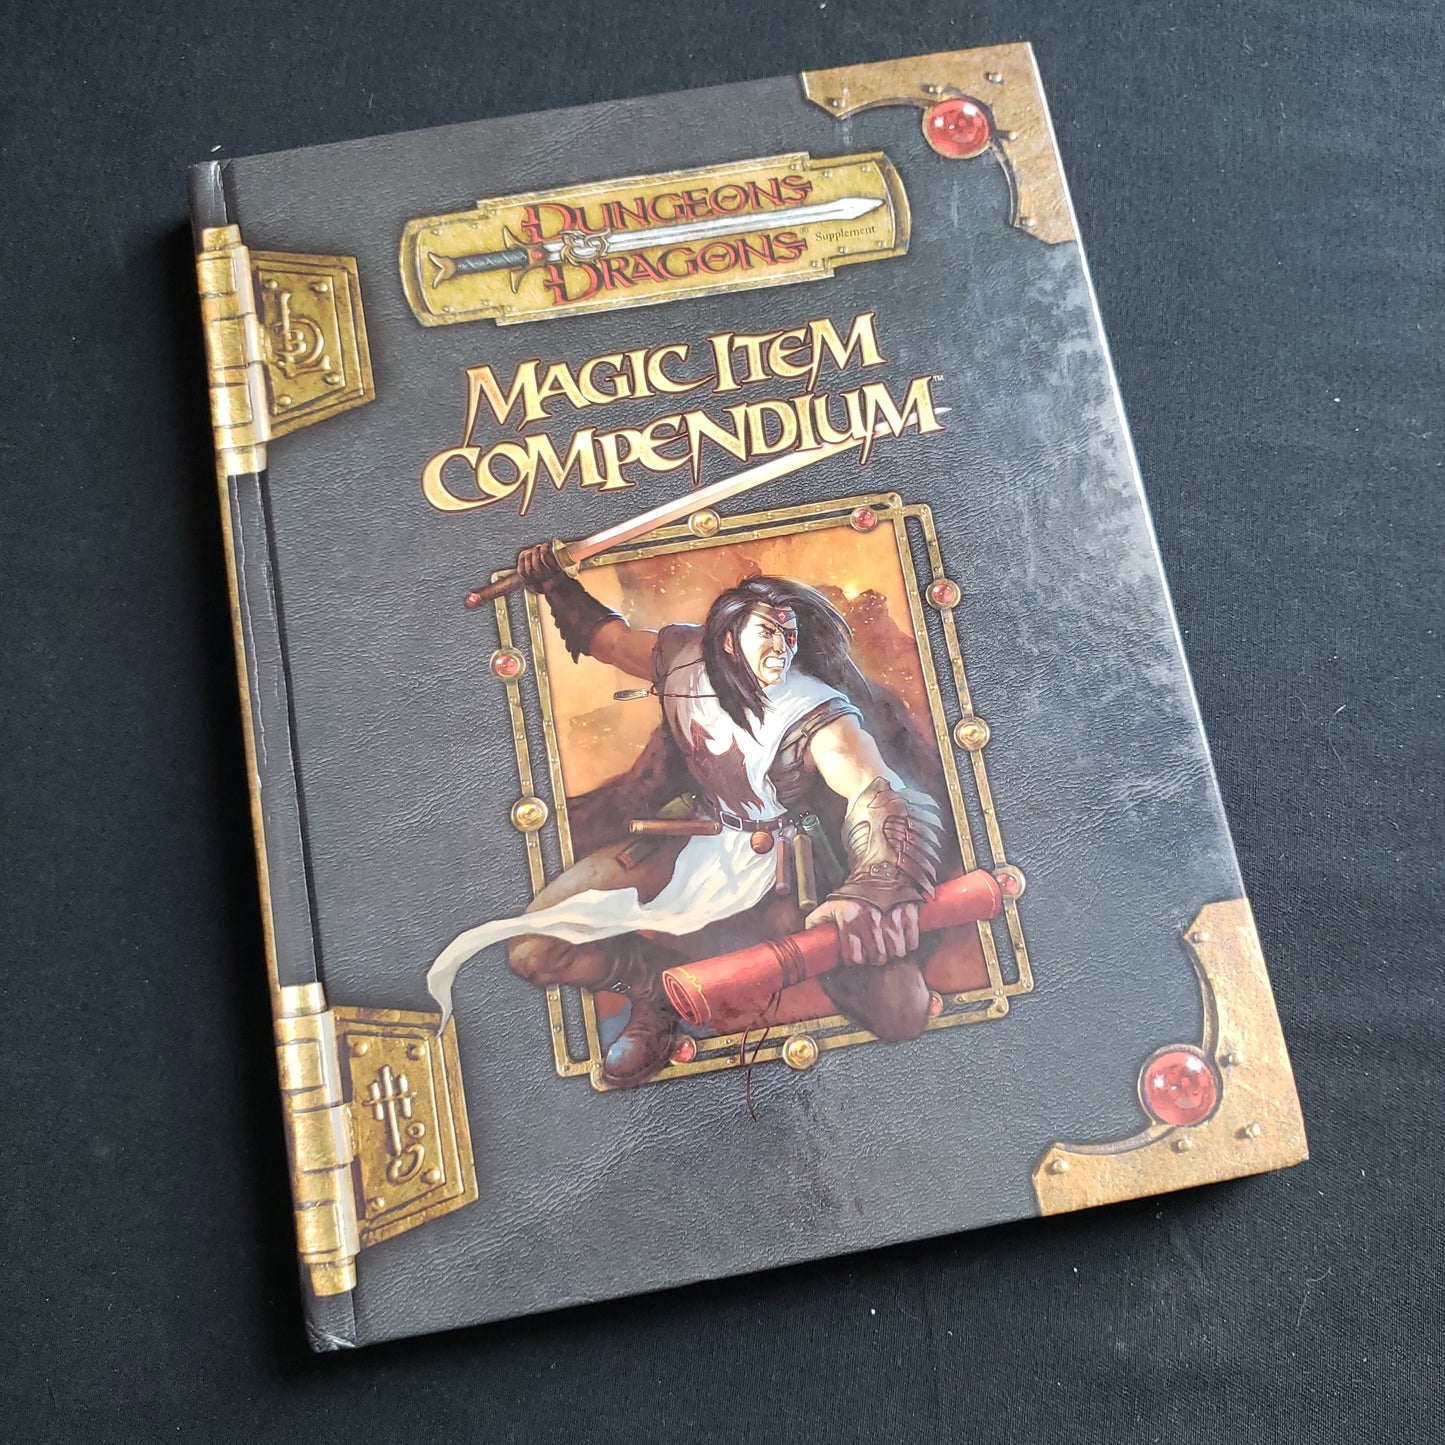 Image shows the front cover of the Magic Item Compendium book for the Dungeons & Dragons roleplaying game